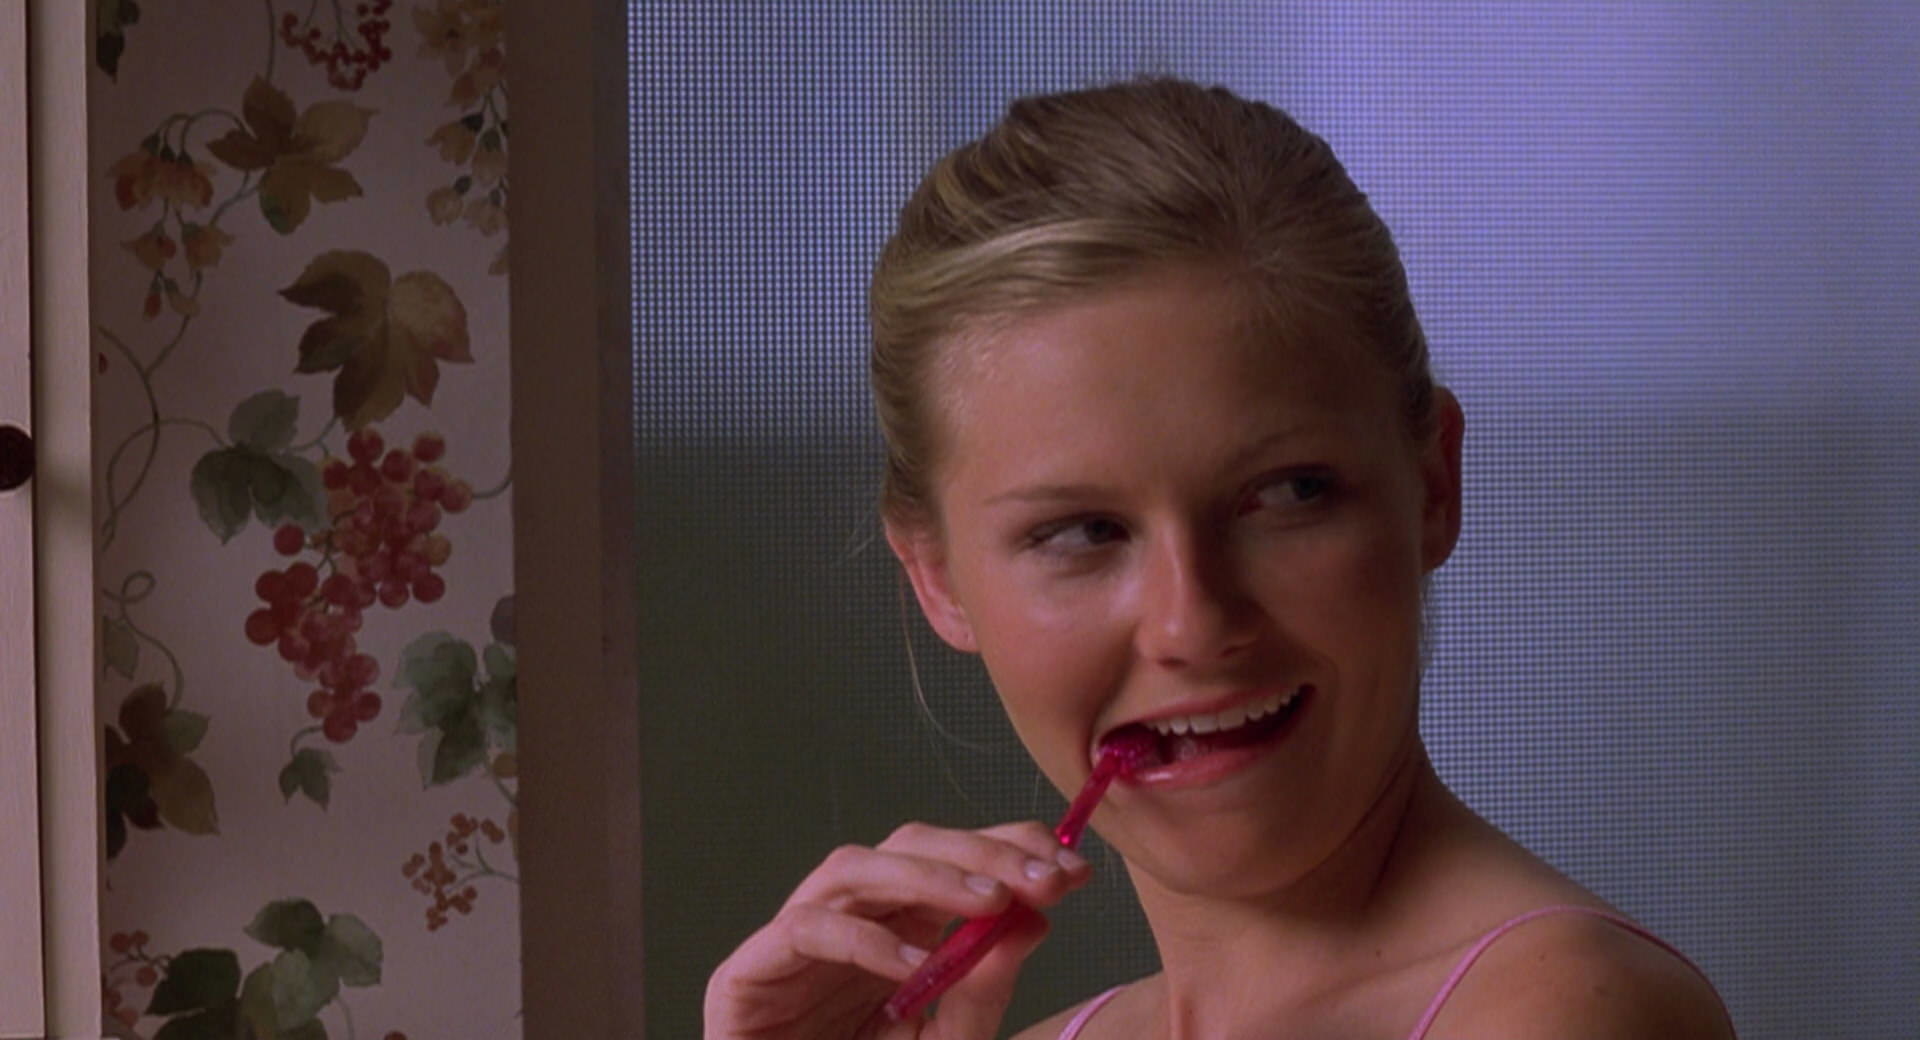 Torrance looking at Cliff with a toothbrush in her mouth.